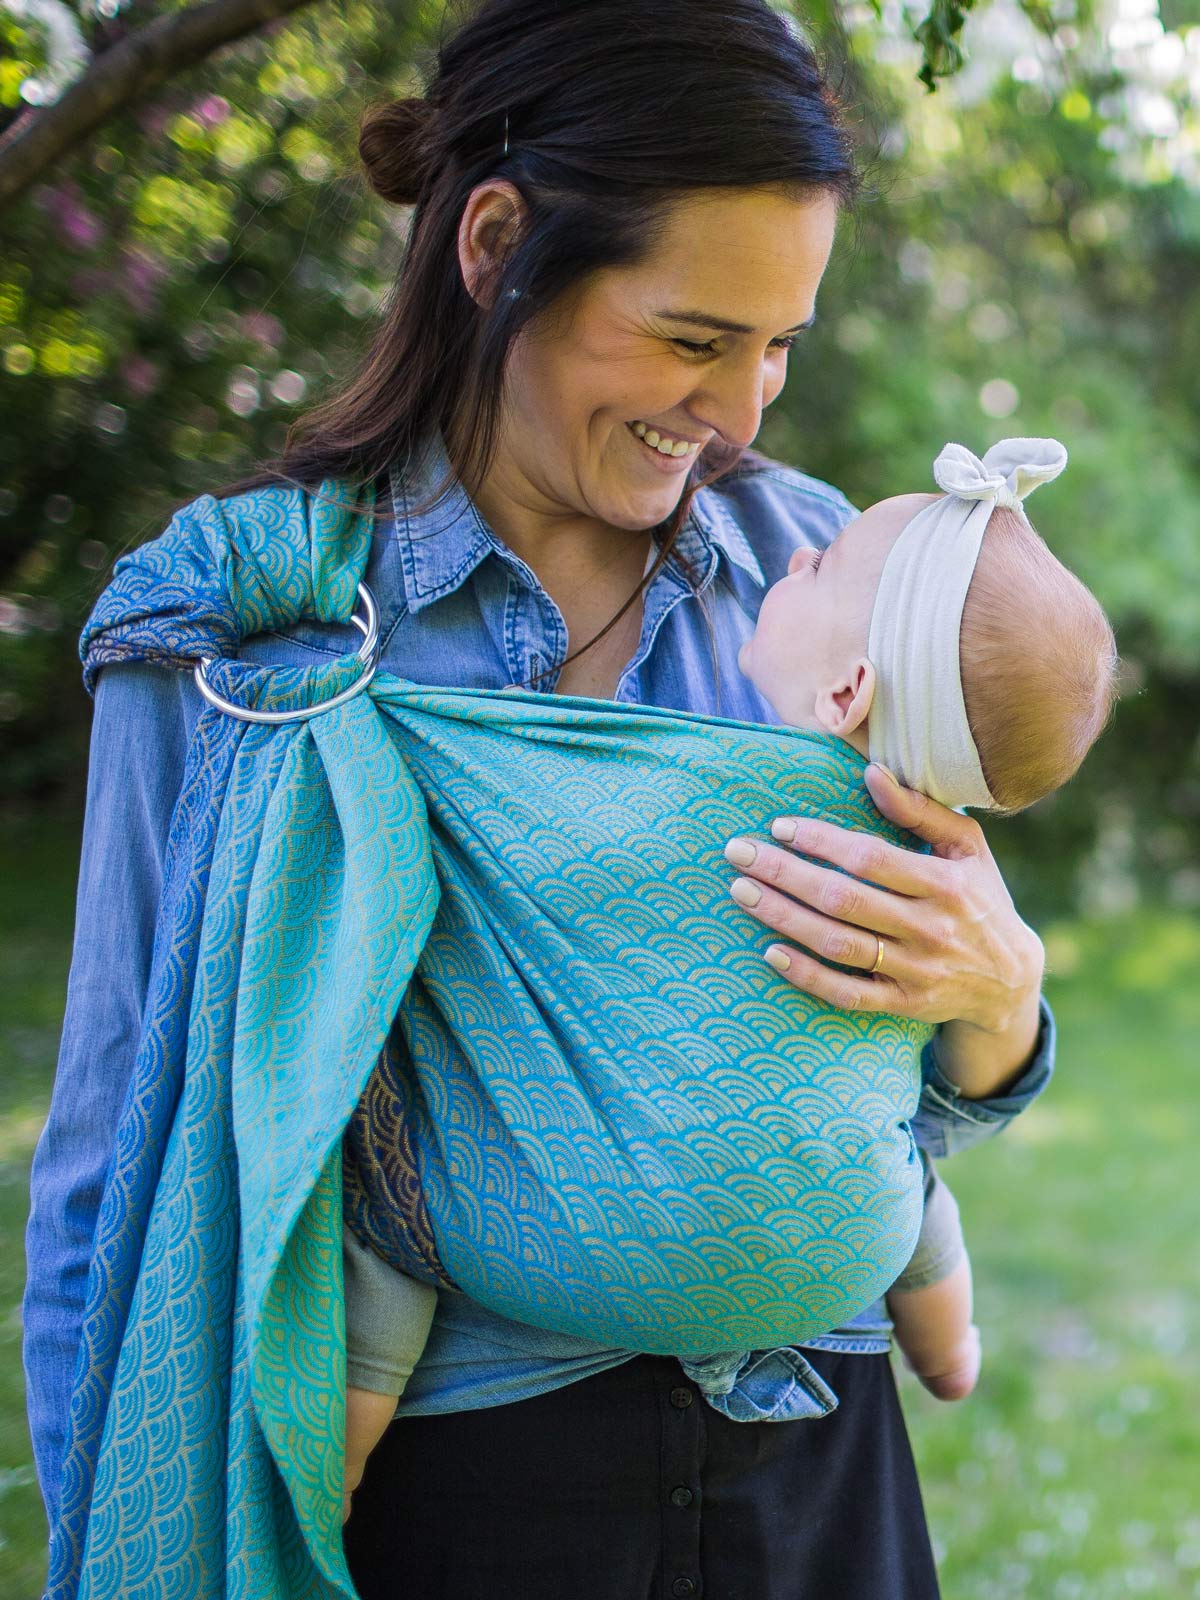 How To Use a Ring Sling